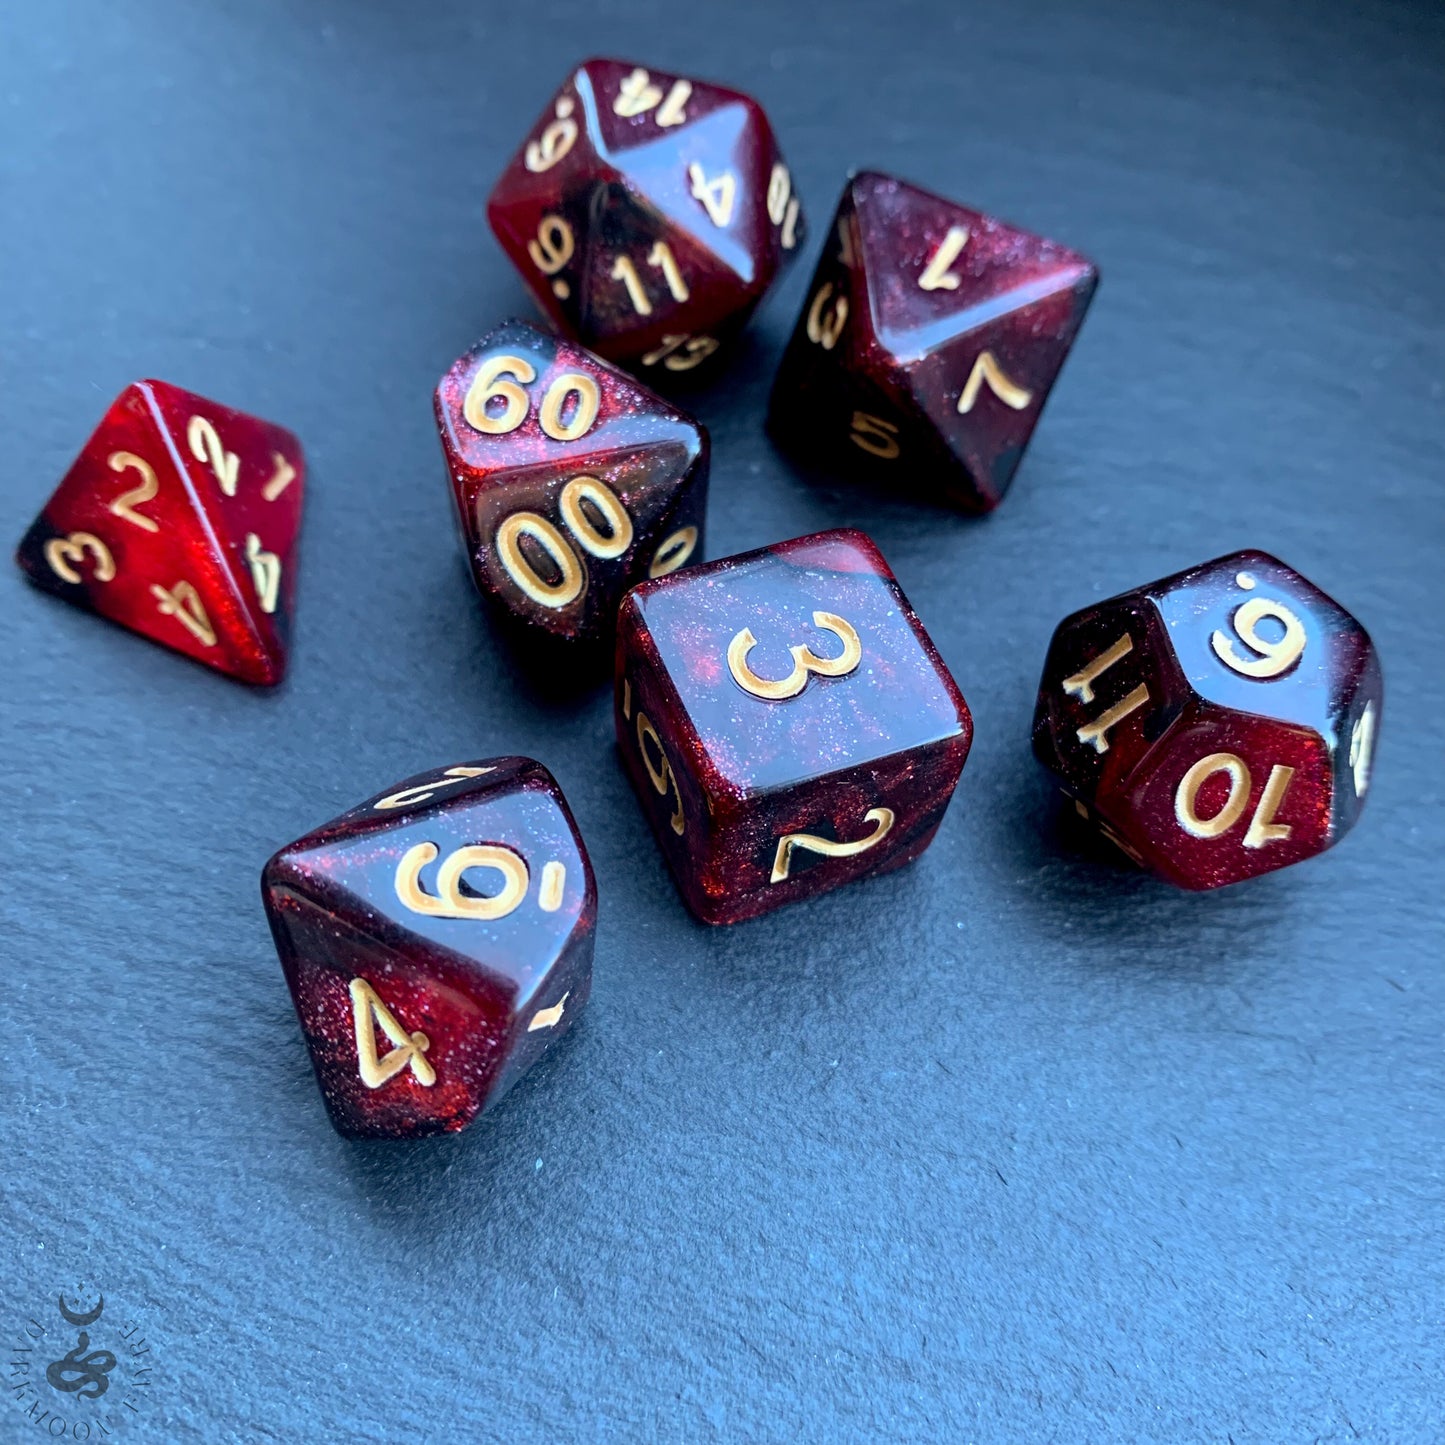 DnD 7 Dice Sorcerer's Blood Red And Black Set With A Fairtrade Cotton Storage Pouch - Darkmoon Fayre